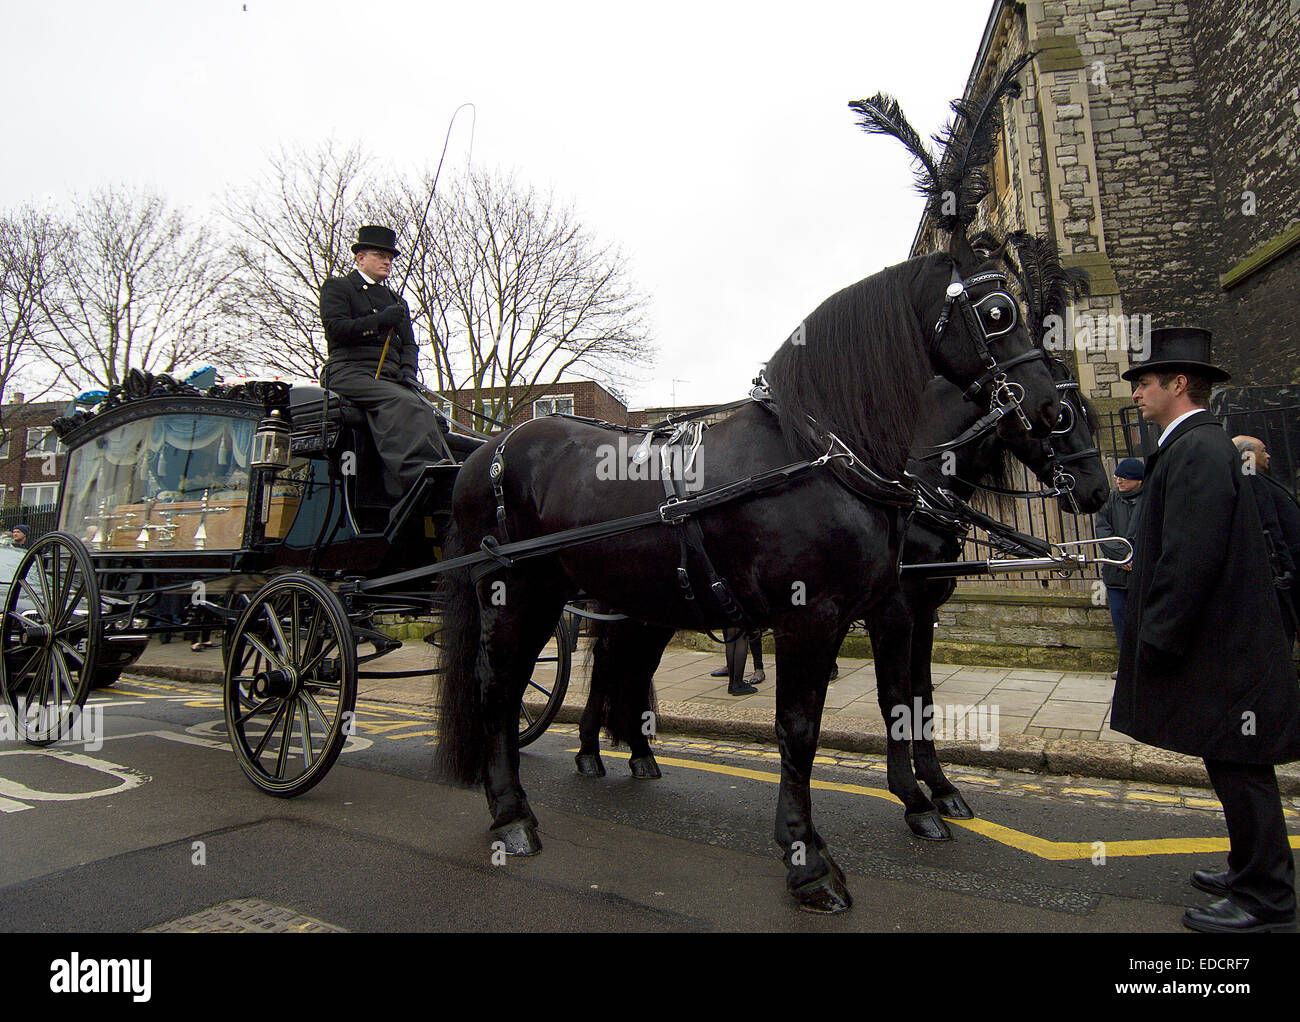 A funeral was made a bit more memorable with an ornate Victorian-style glass hearse drawn by a pair of Belgian Black horses. Stock Photo